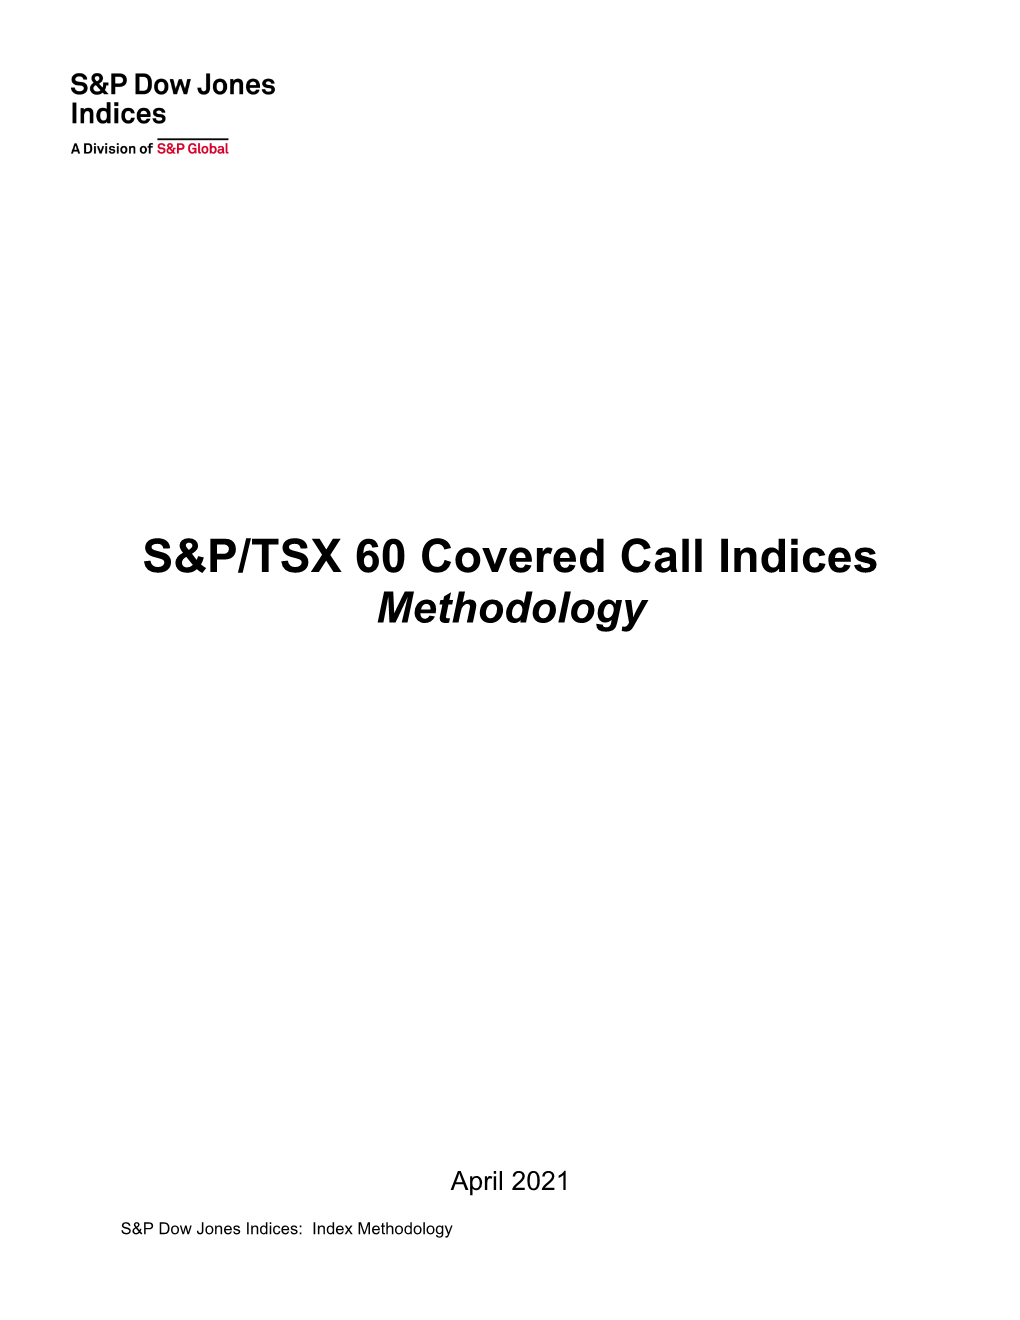 S&P/TSX 60 Covered Call Indices Methodology